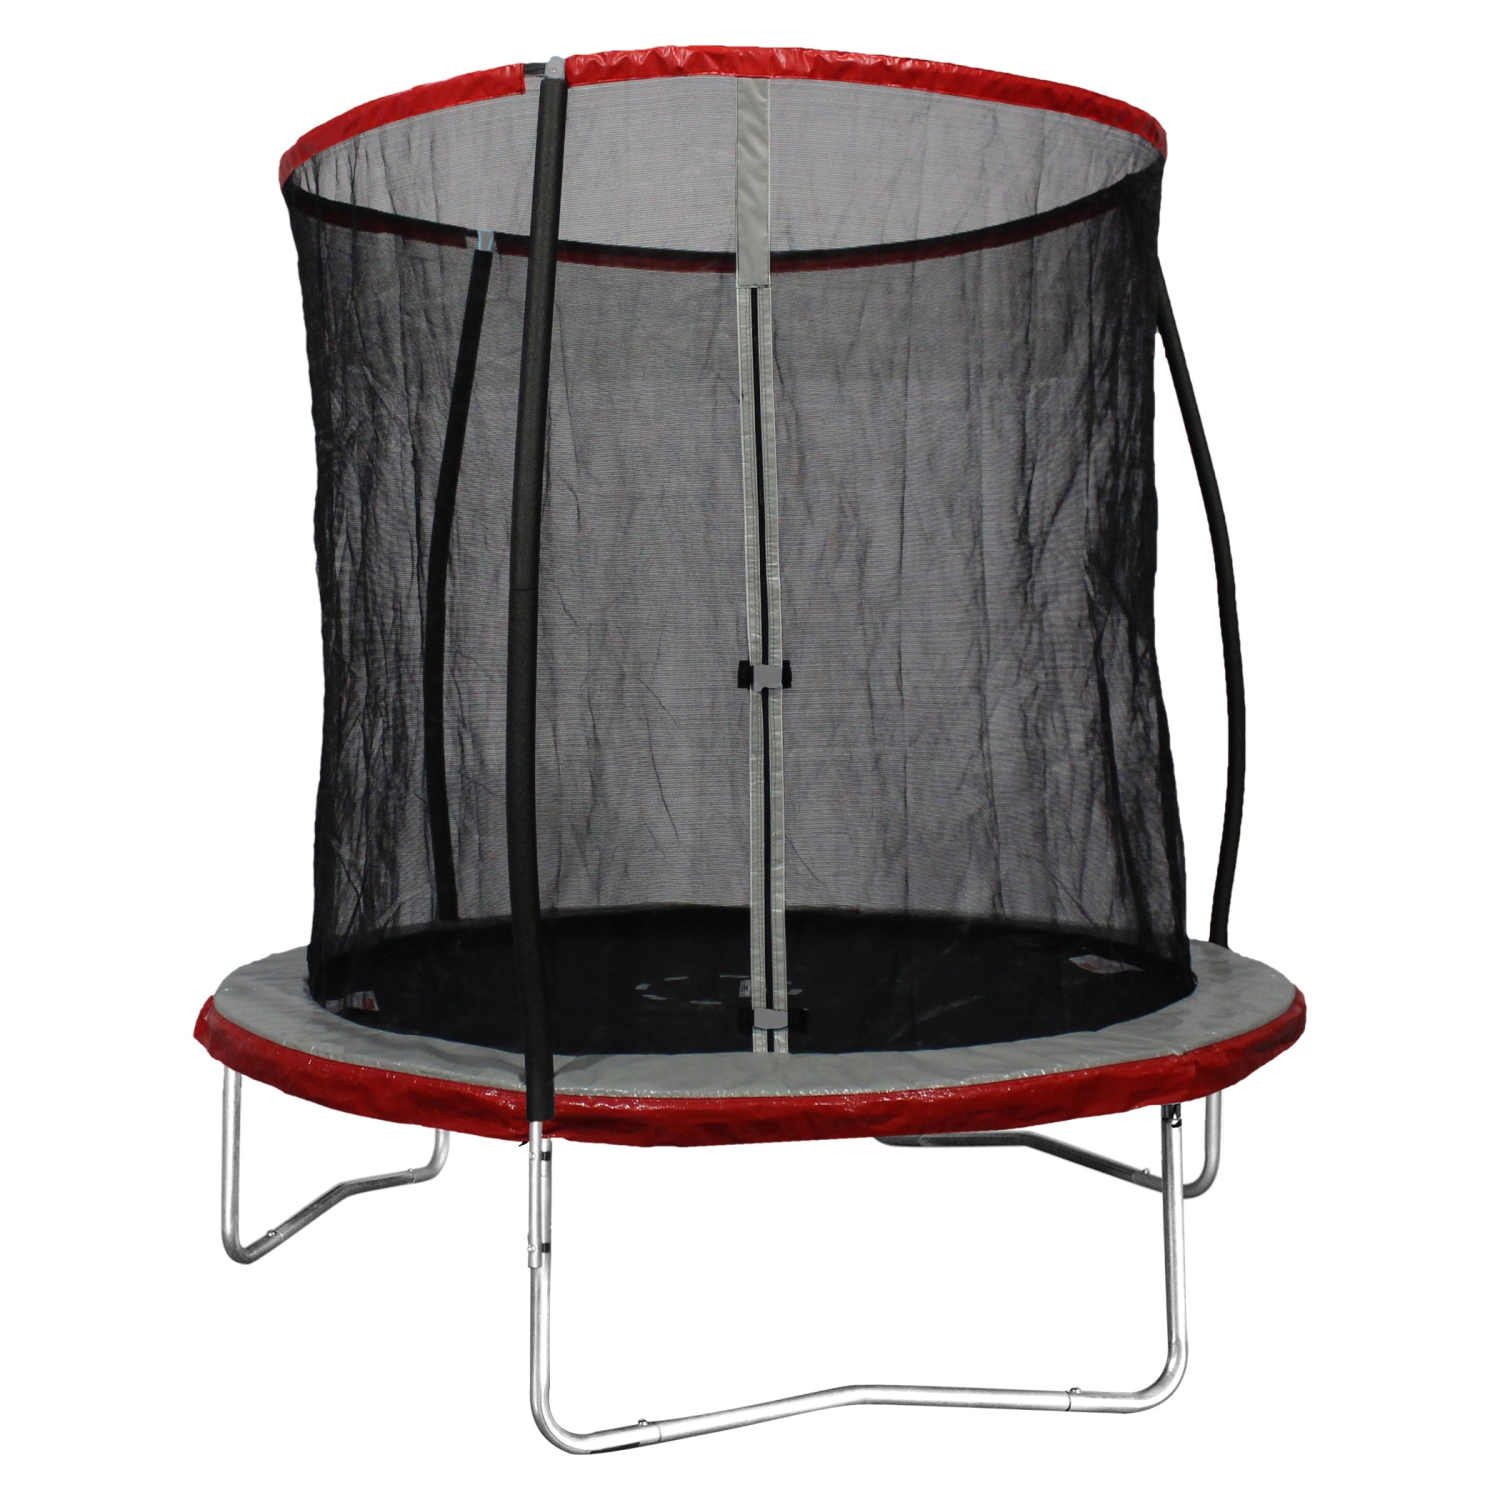 Trainor Sports 8 FT Trampoline and Enclosure Combo | | Jumping Mat and Full Coverage Spring Padding